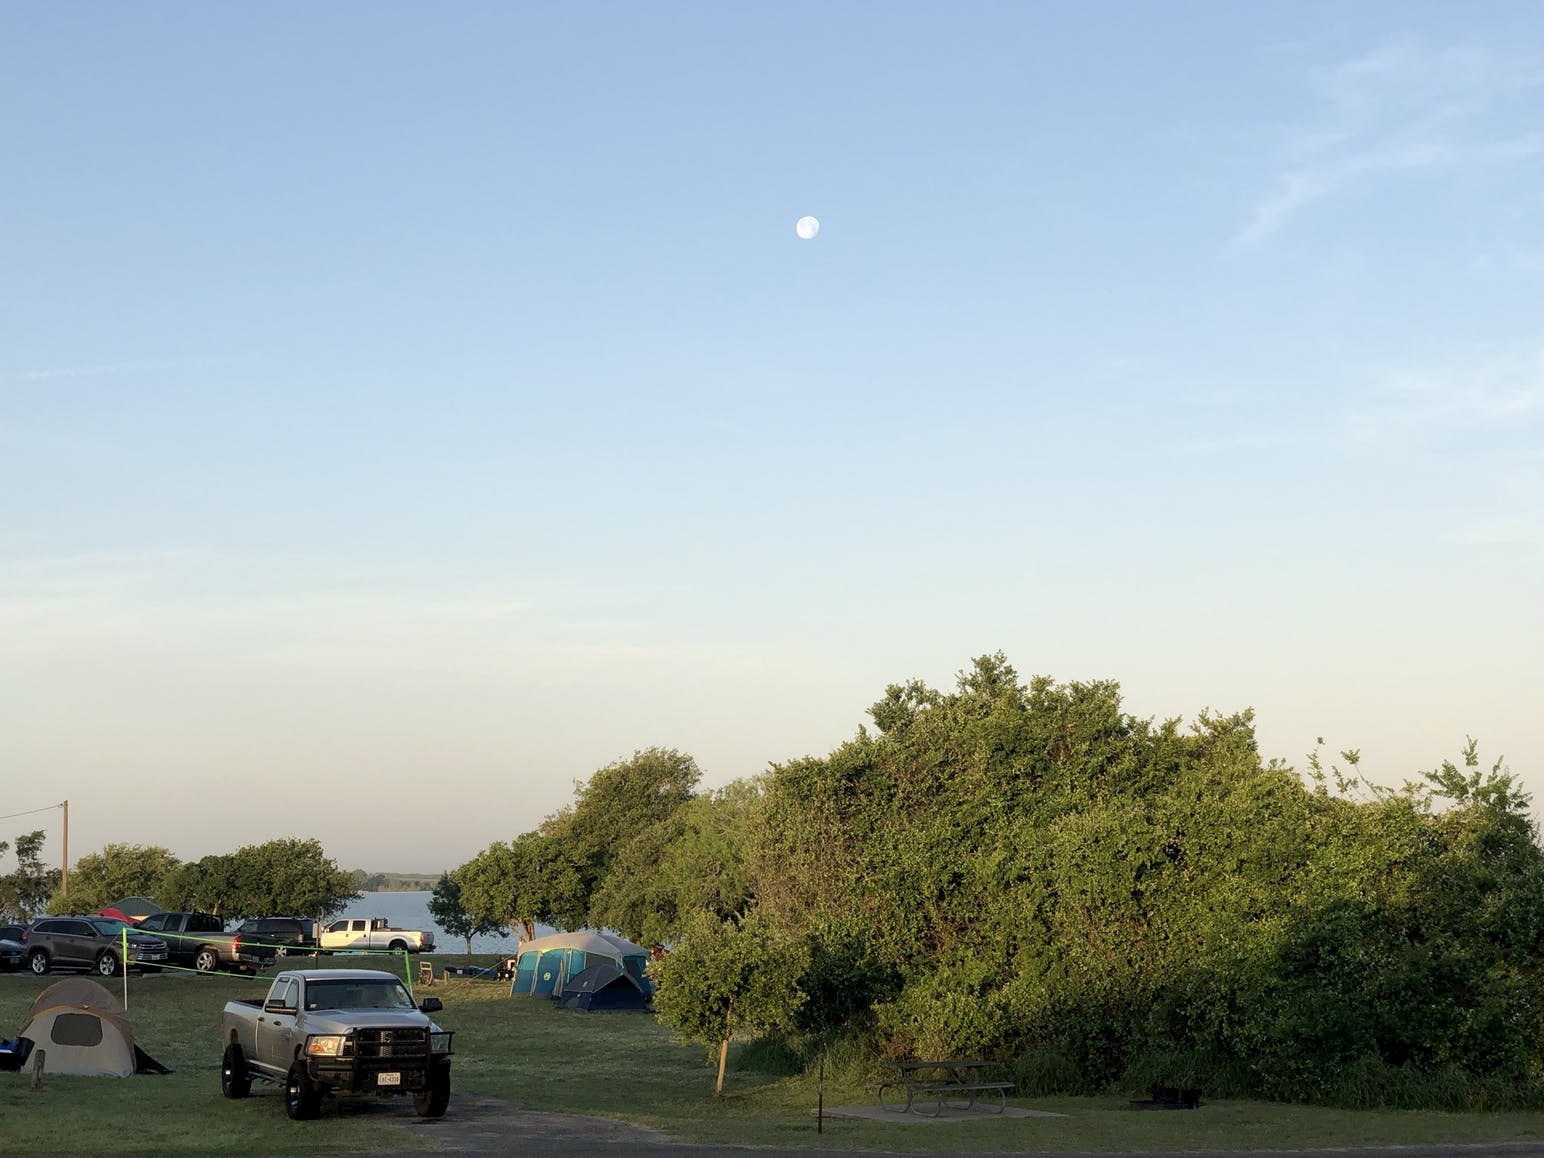 Cars parked beside tents at campground under a full moon.